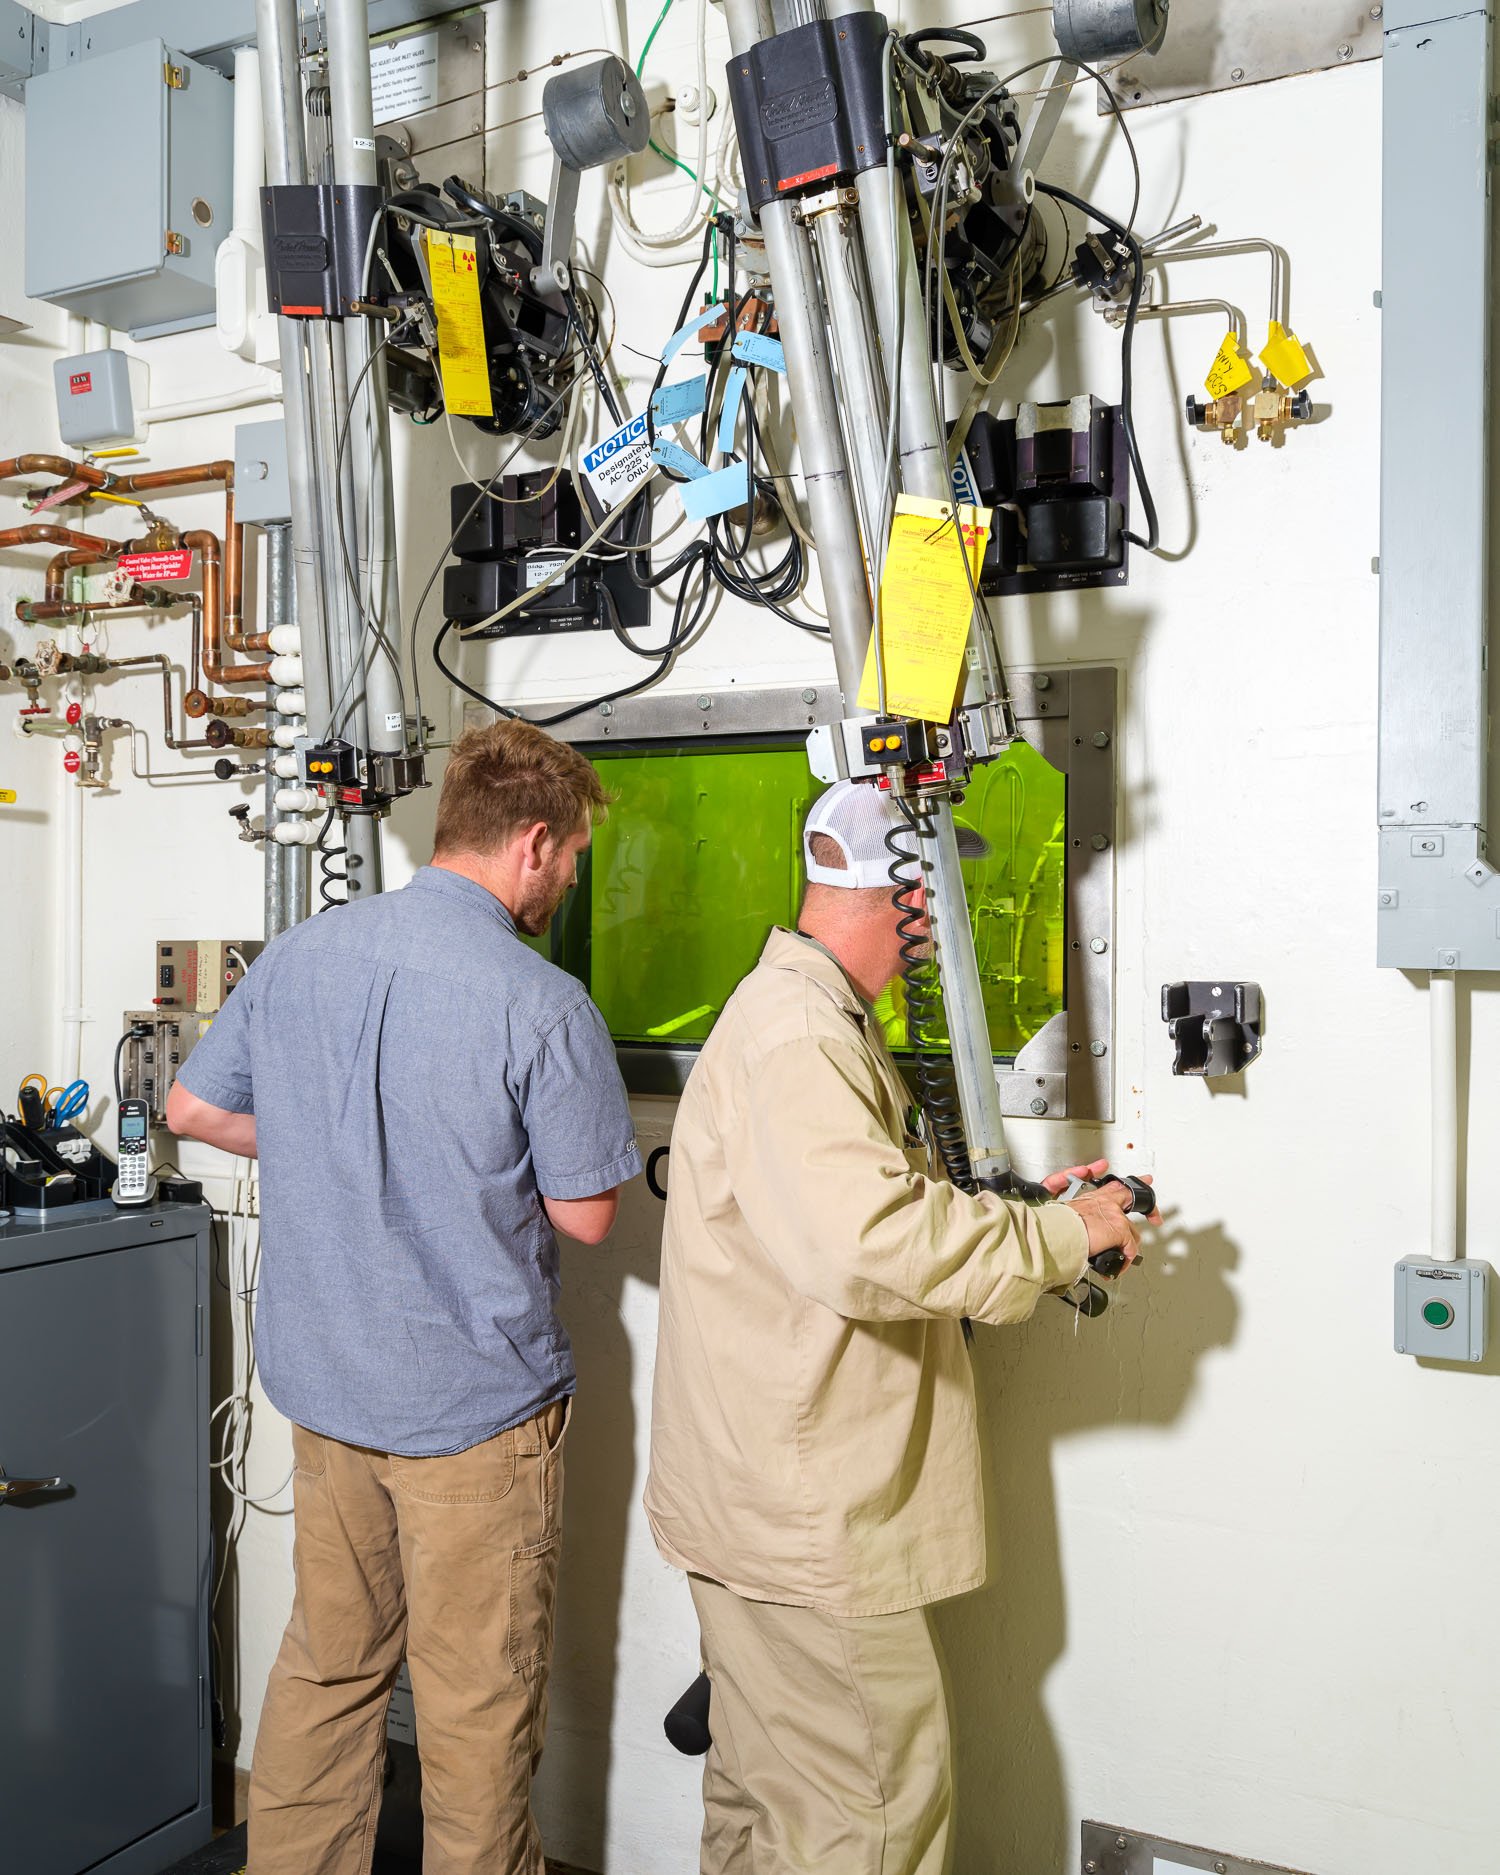  Hot cell at the the Radiochemical Engineering Development Center (REDC) at Oak Ridge National Laboratory. The REDC helps to produce isotopes, nuclear fuels, and other materials. Here, two technicians work with actinium-225 using remote manipulators 